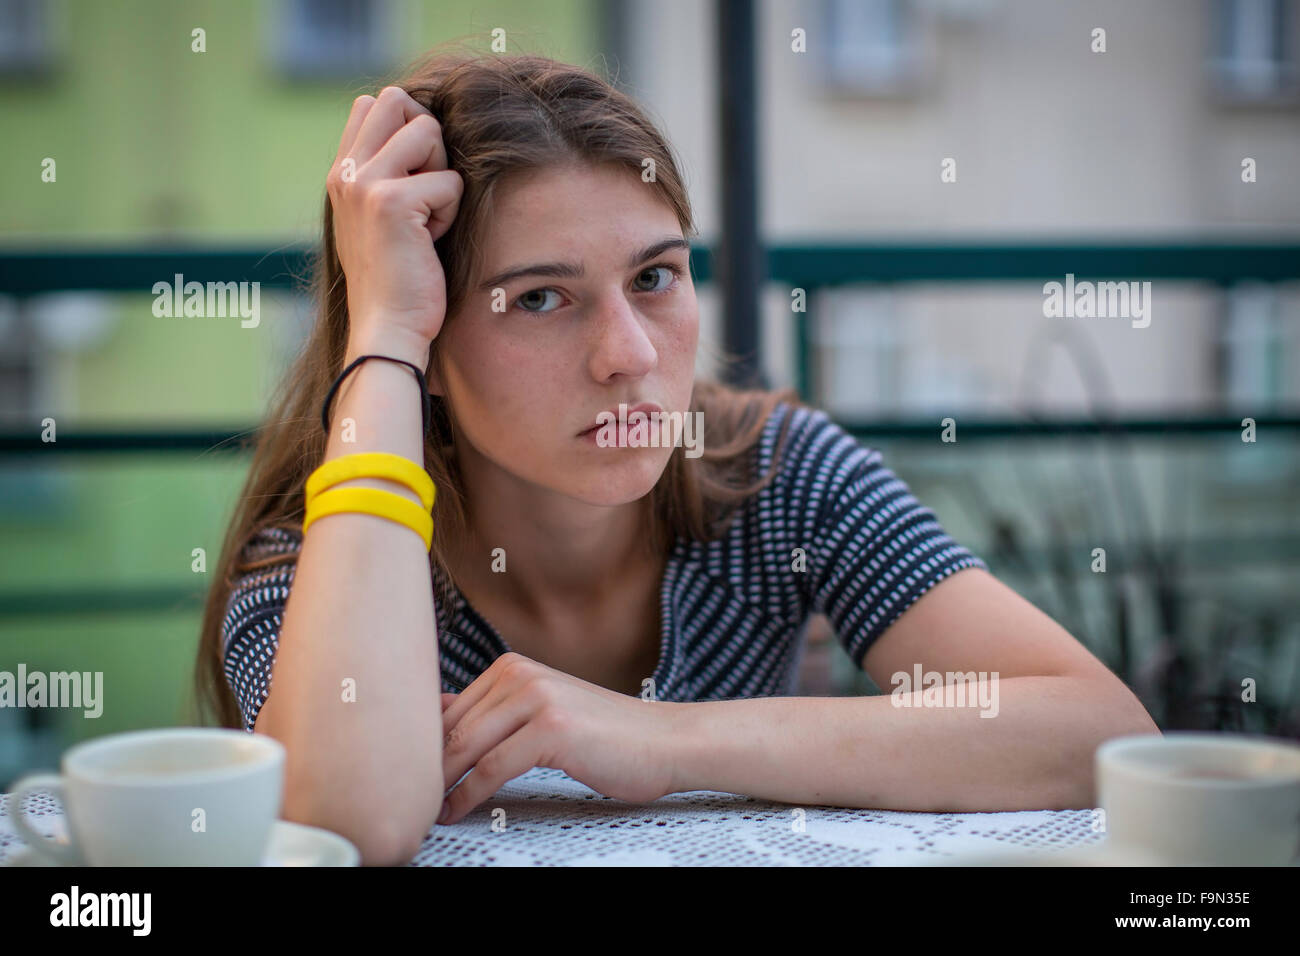 Portrait of young girl with serious look. Stock Photo